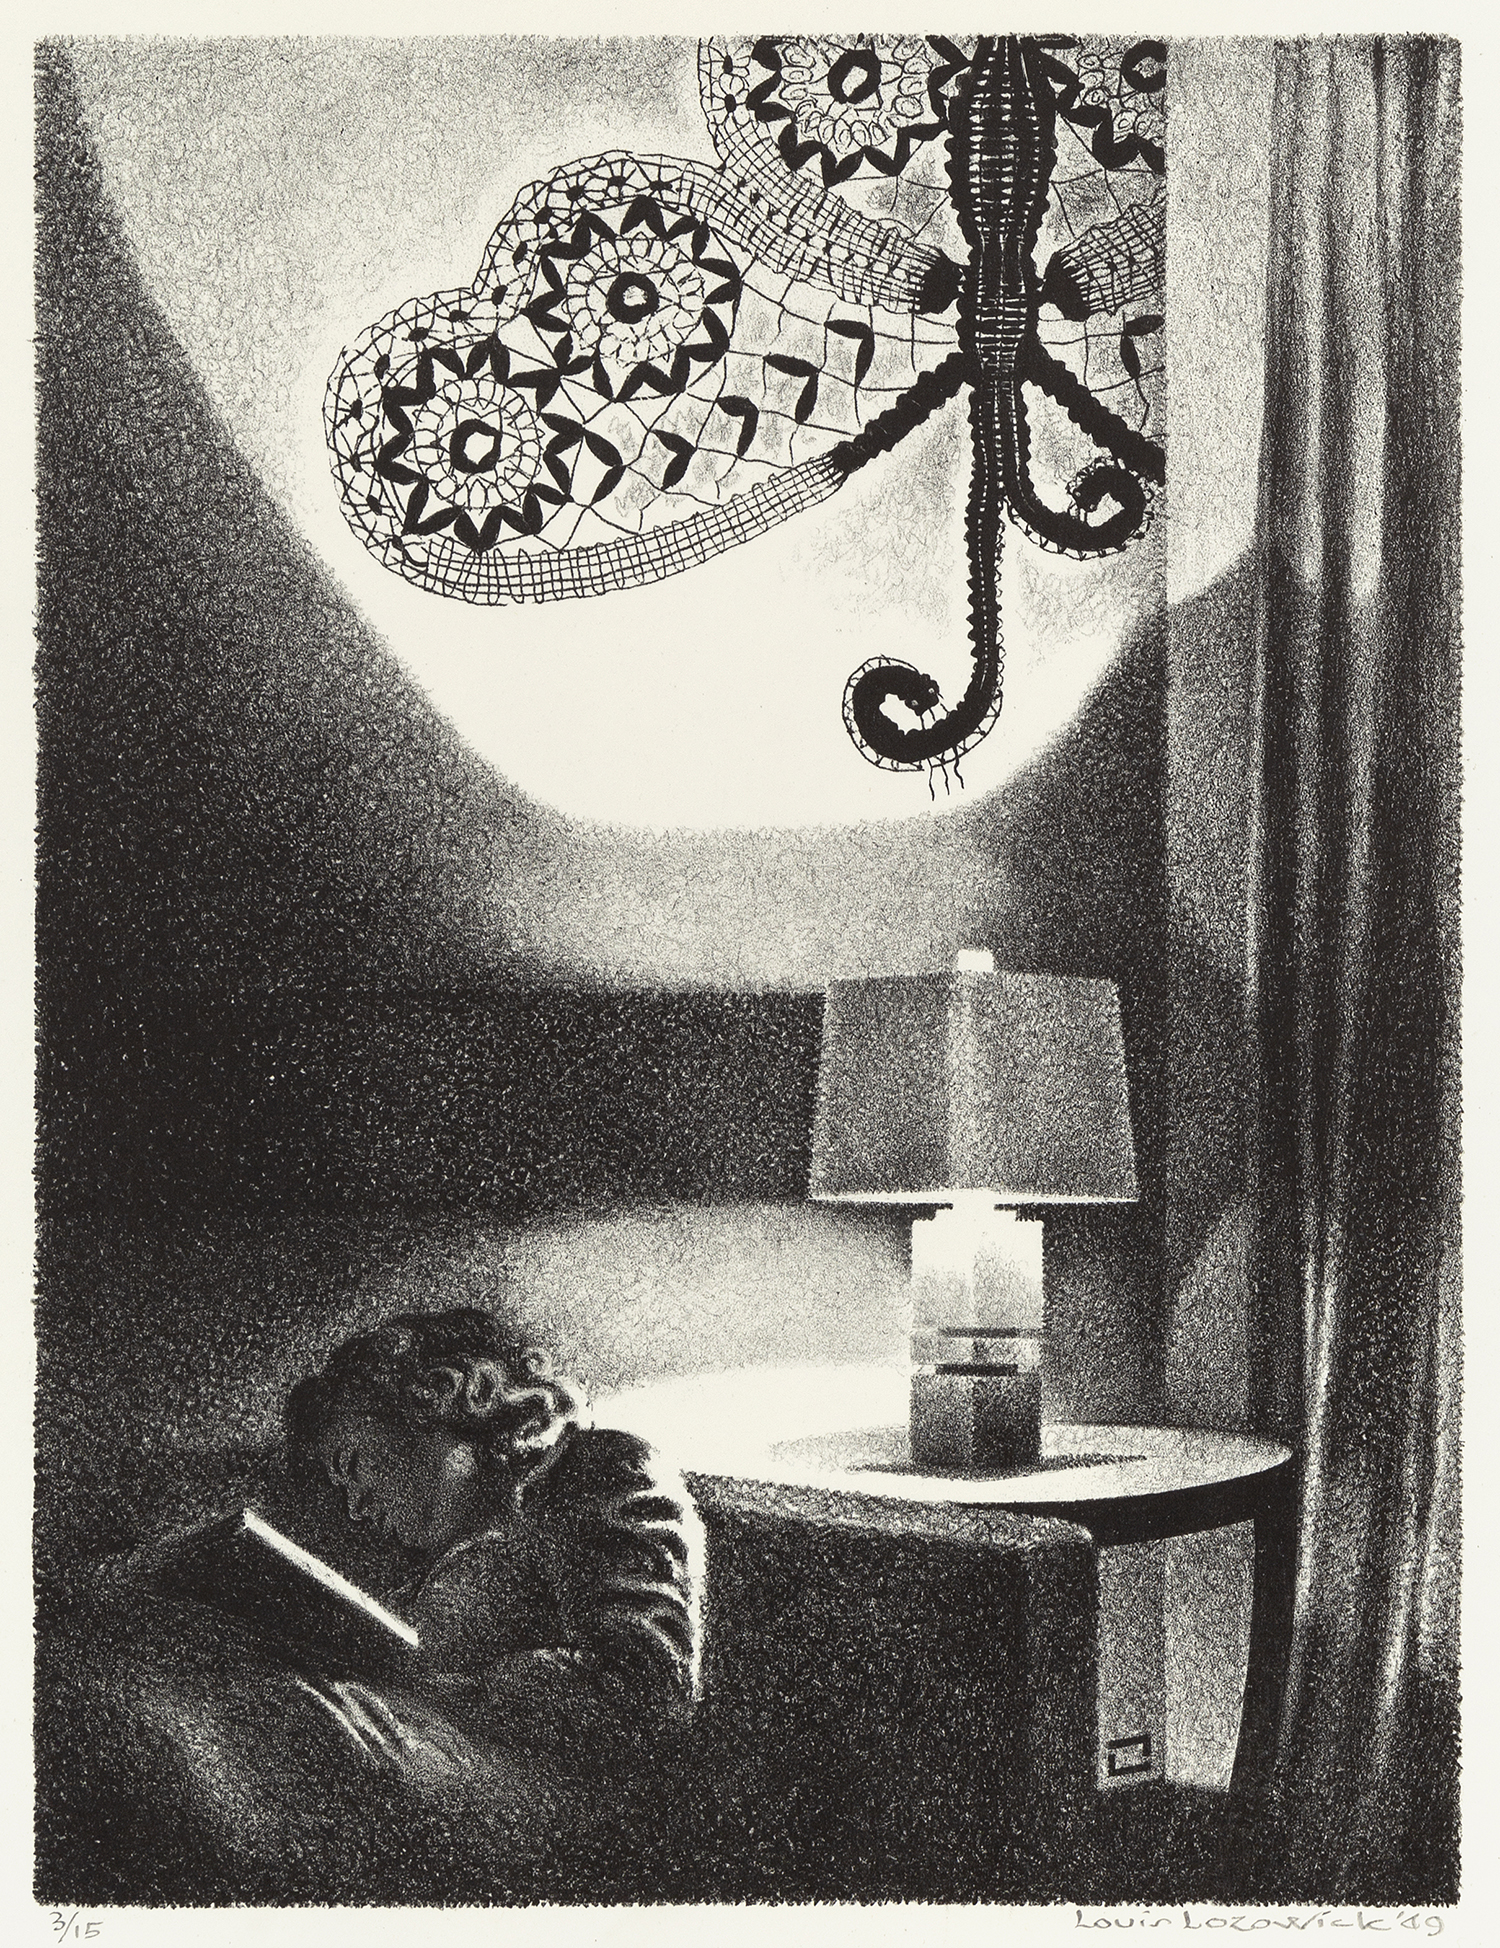 Black Butterfly, 1949, Lithograph, 11 x 9 inches (27.9 x 22.9 cm), Edition of 15